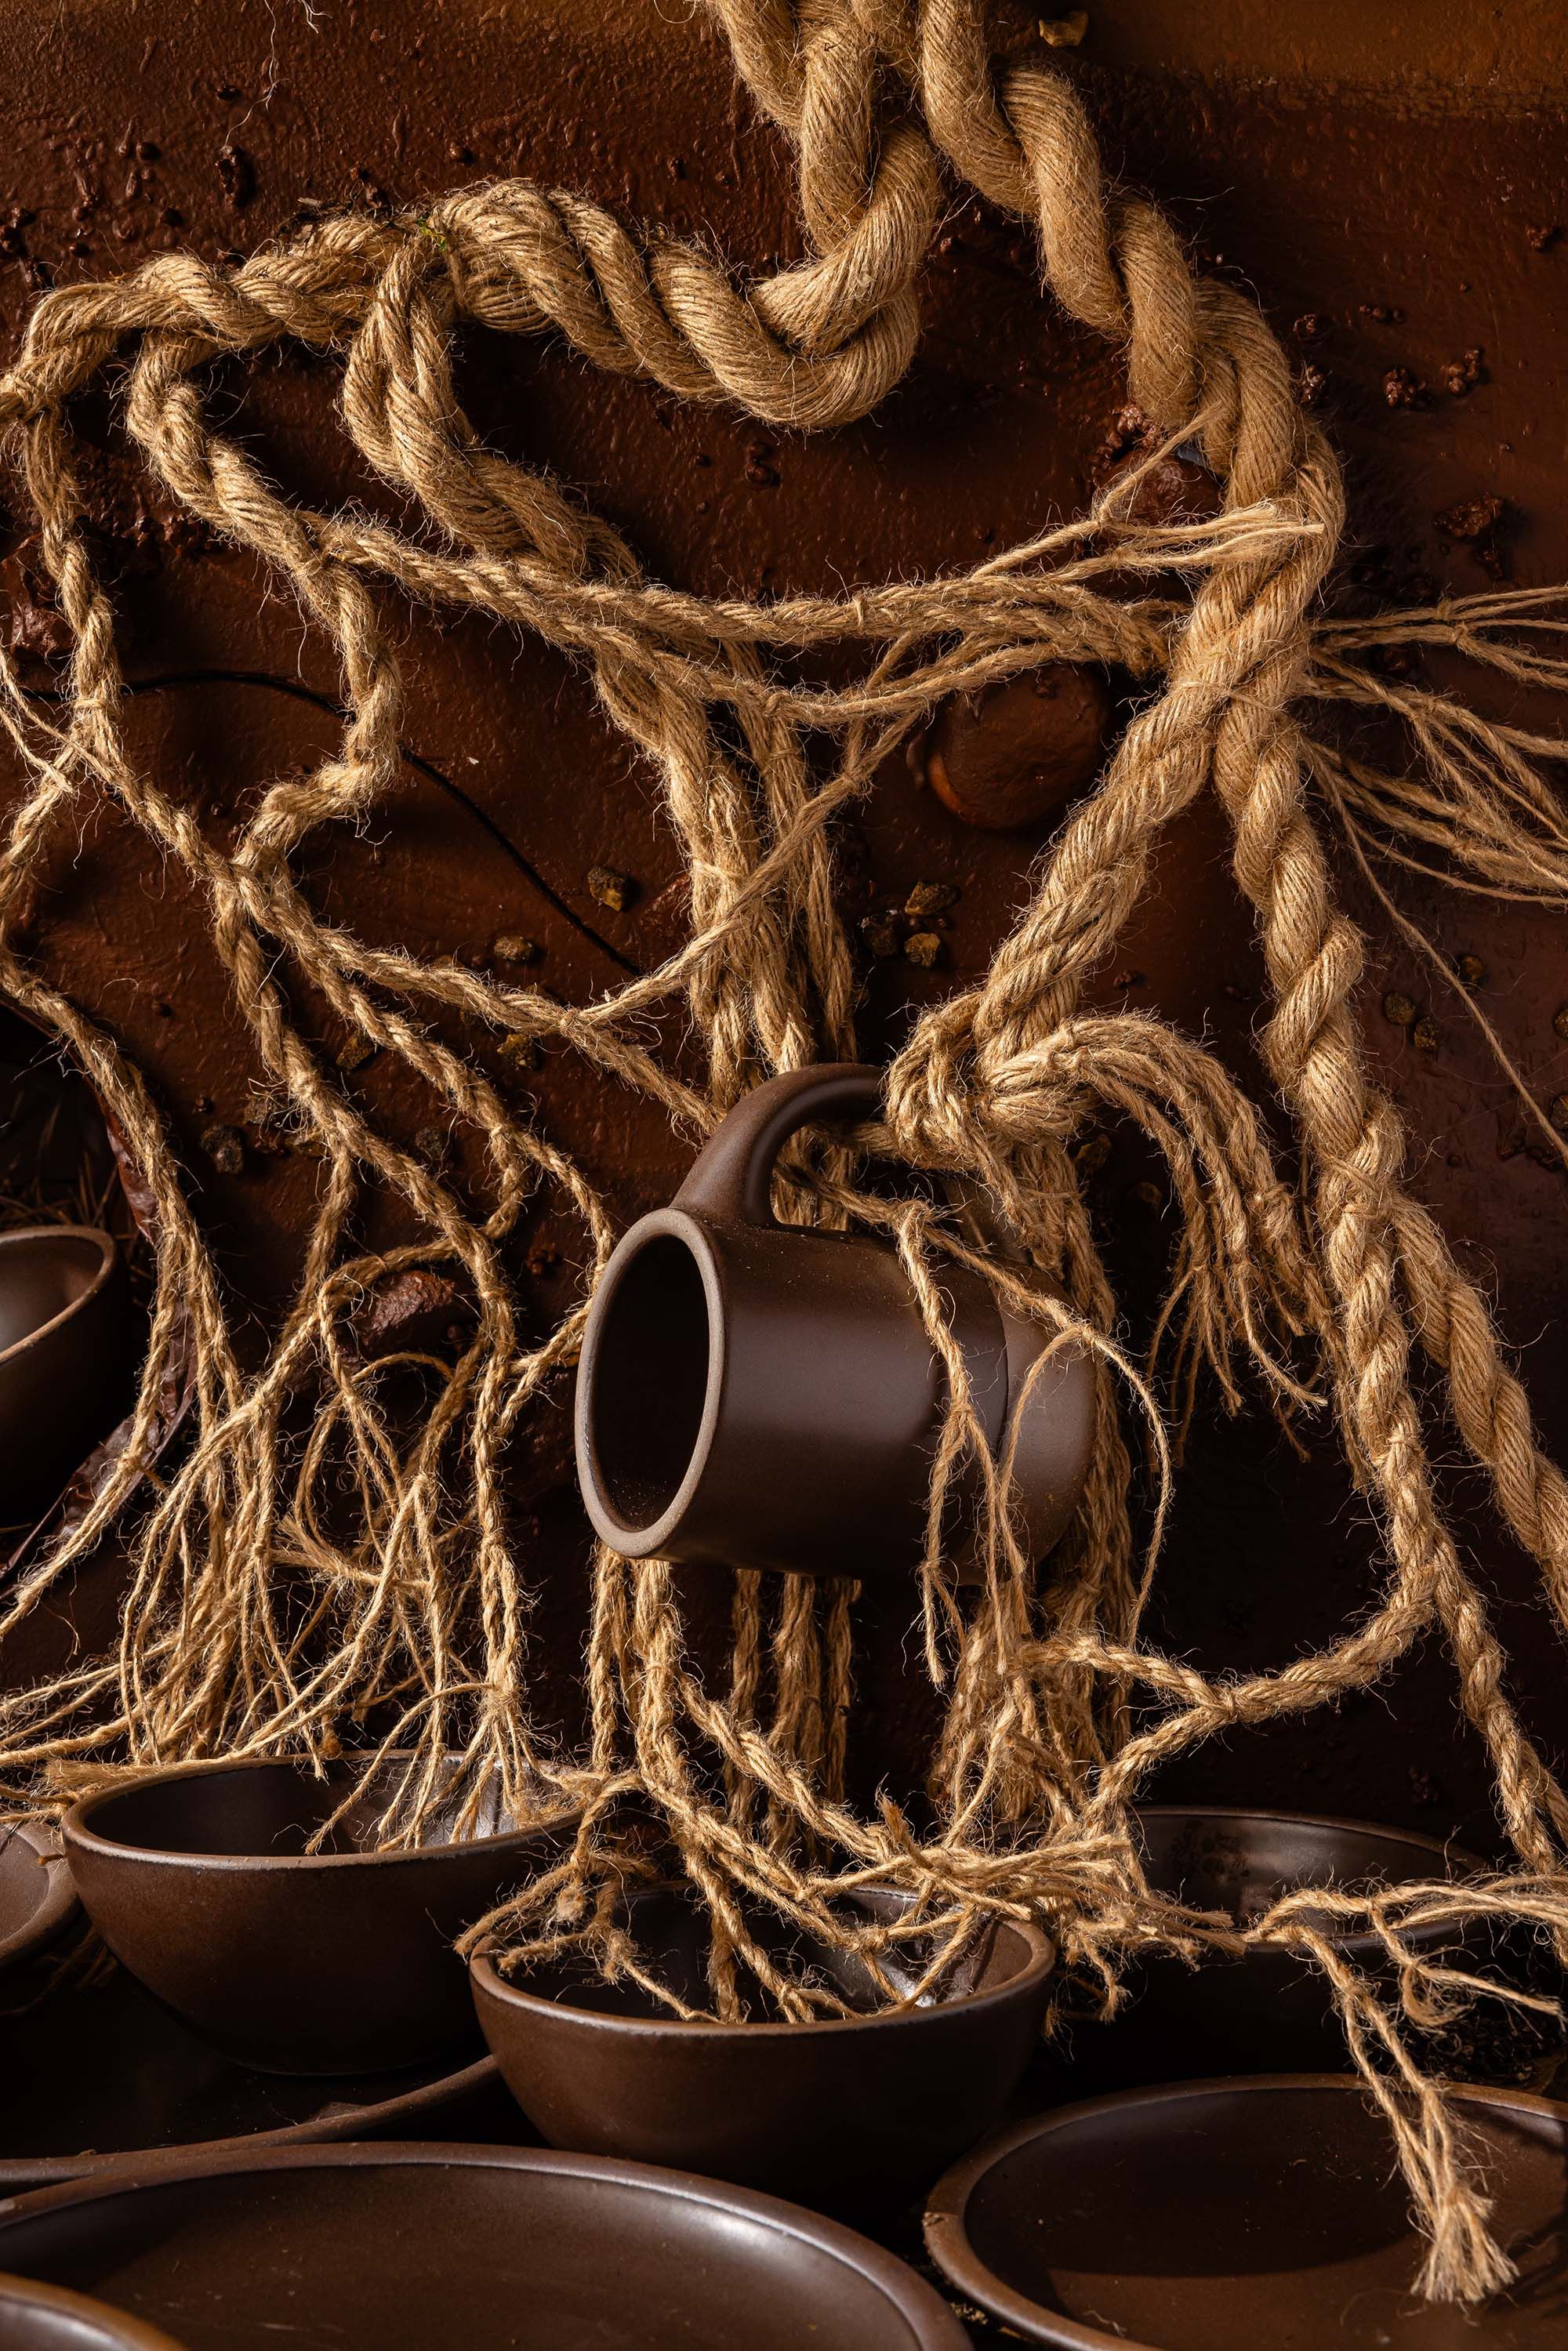 Various plates, bowls, and a mug in a dark brown all surrounded by ropes and dirt.